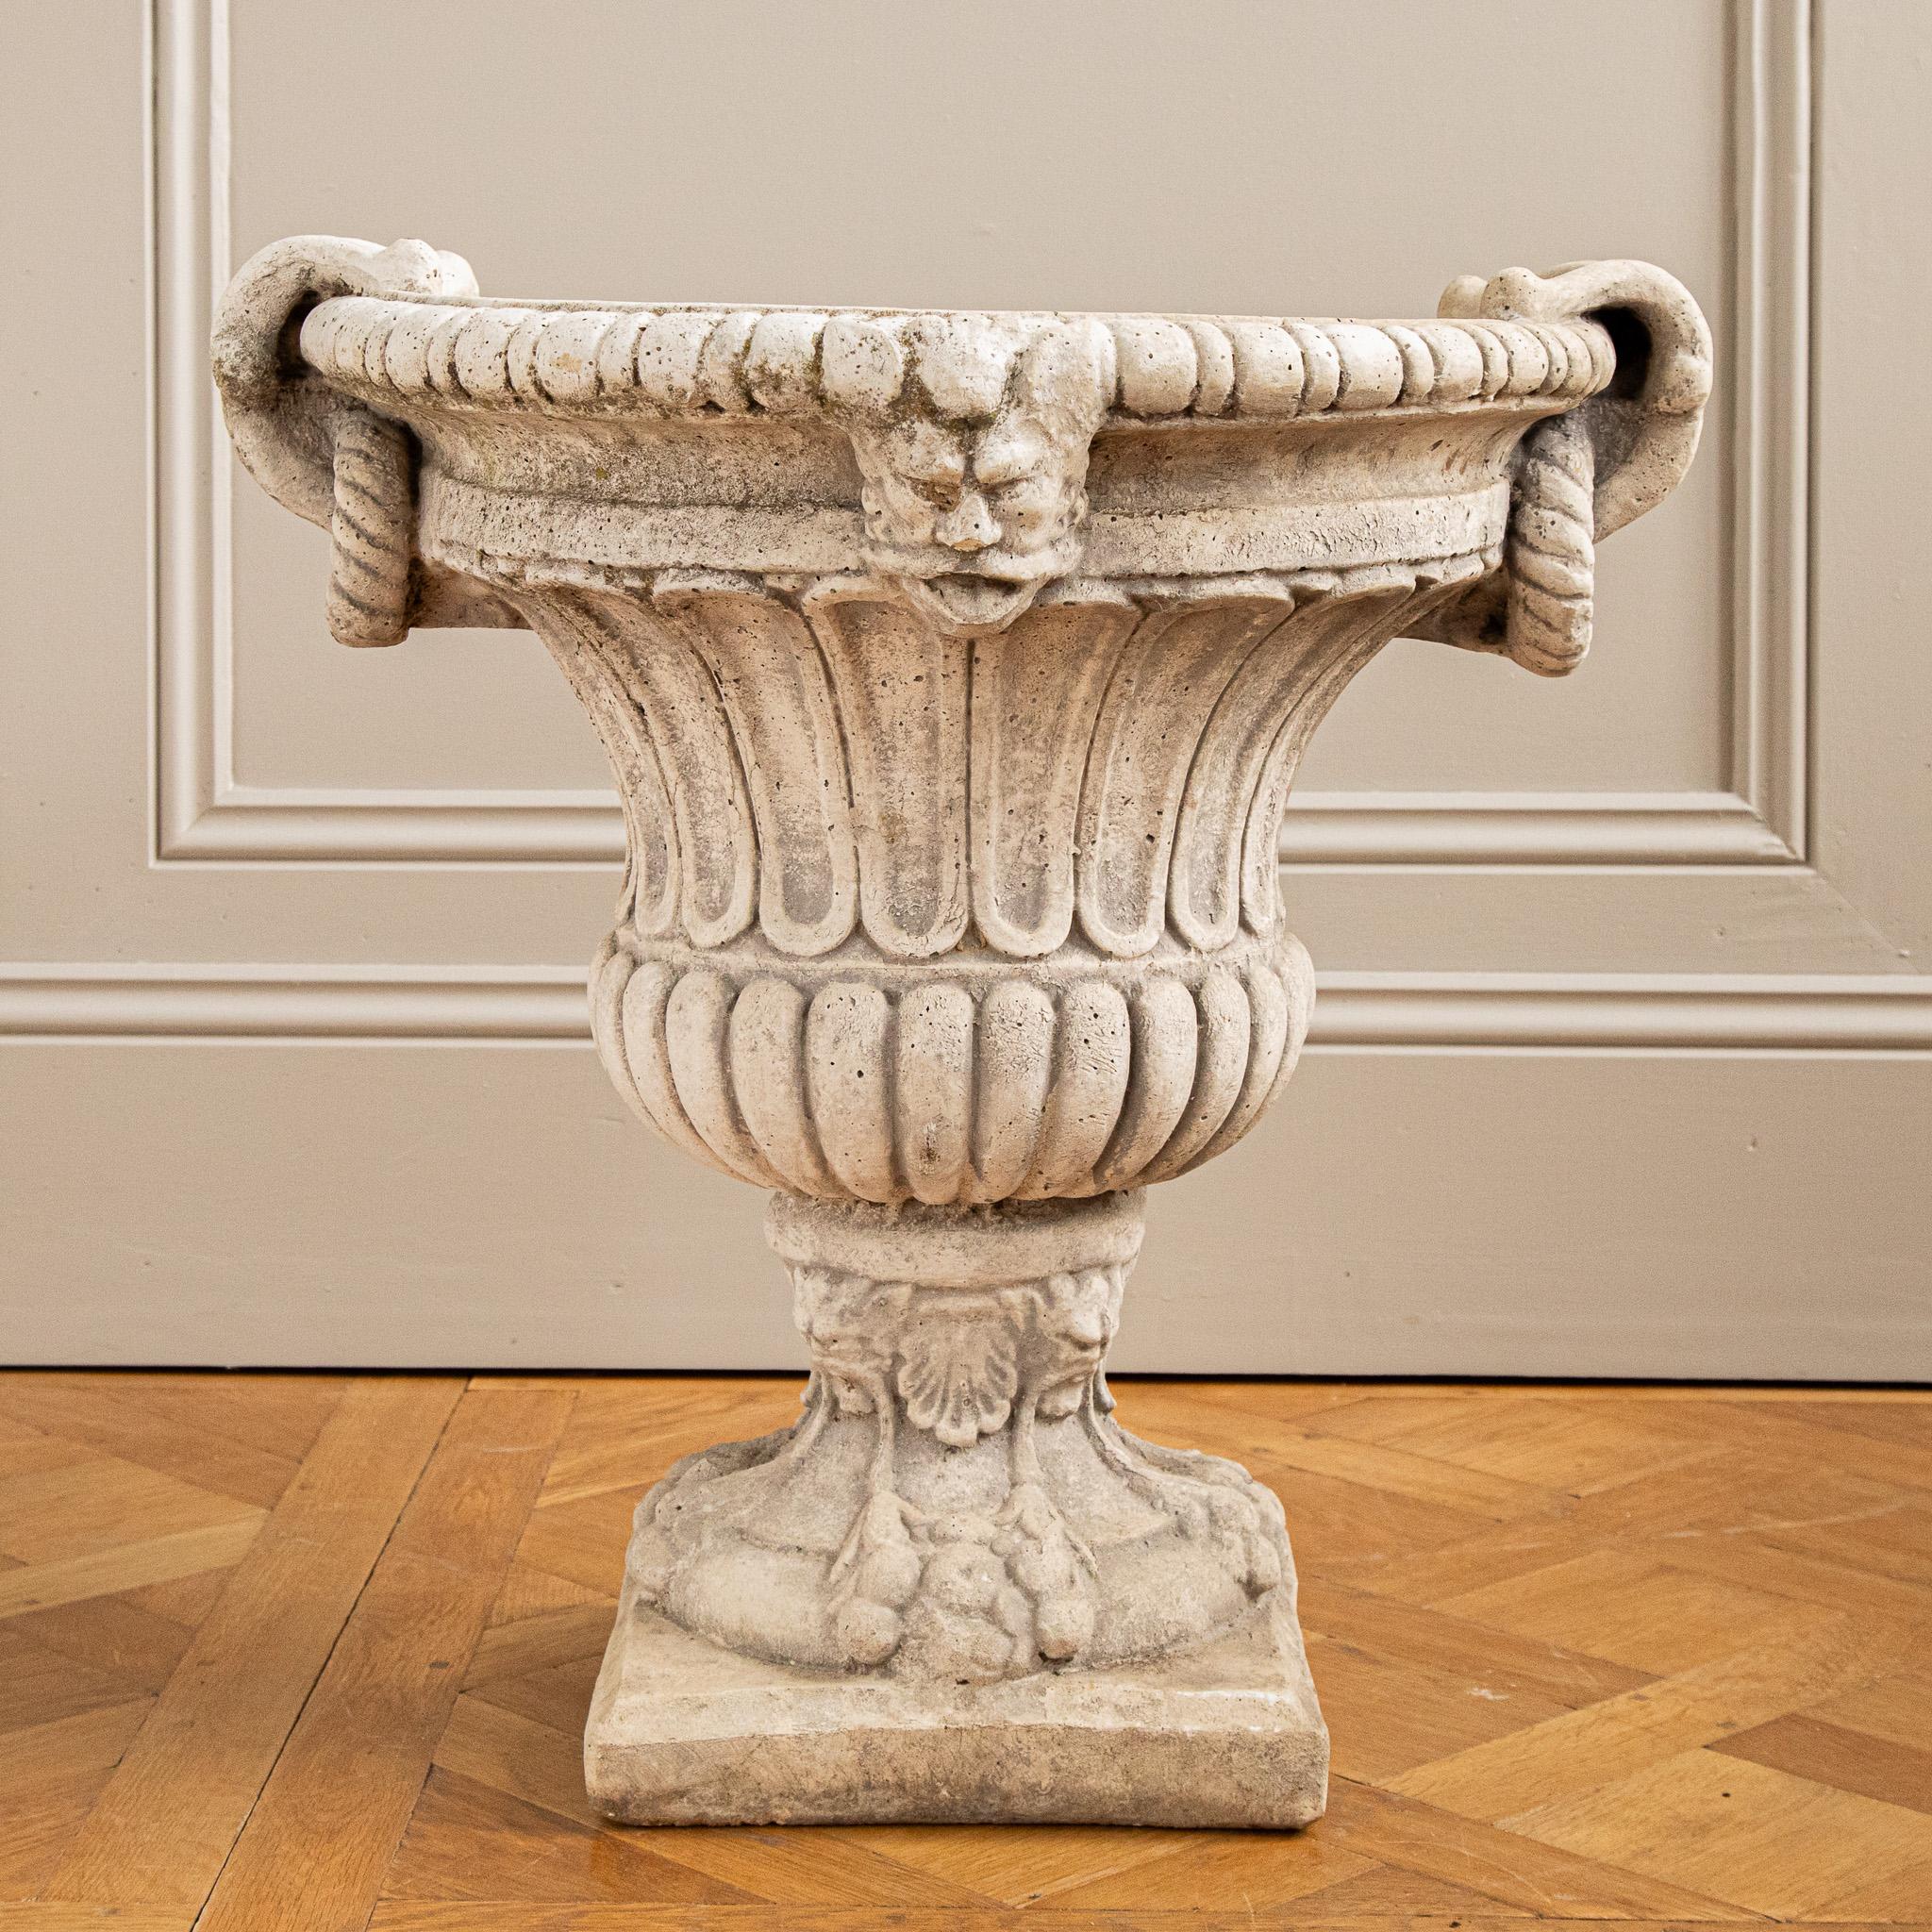 Circa Mid 1900's Set Of 4 Decorative Italian Garden Urns In Reconstituted Stone For Sale 5